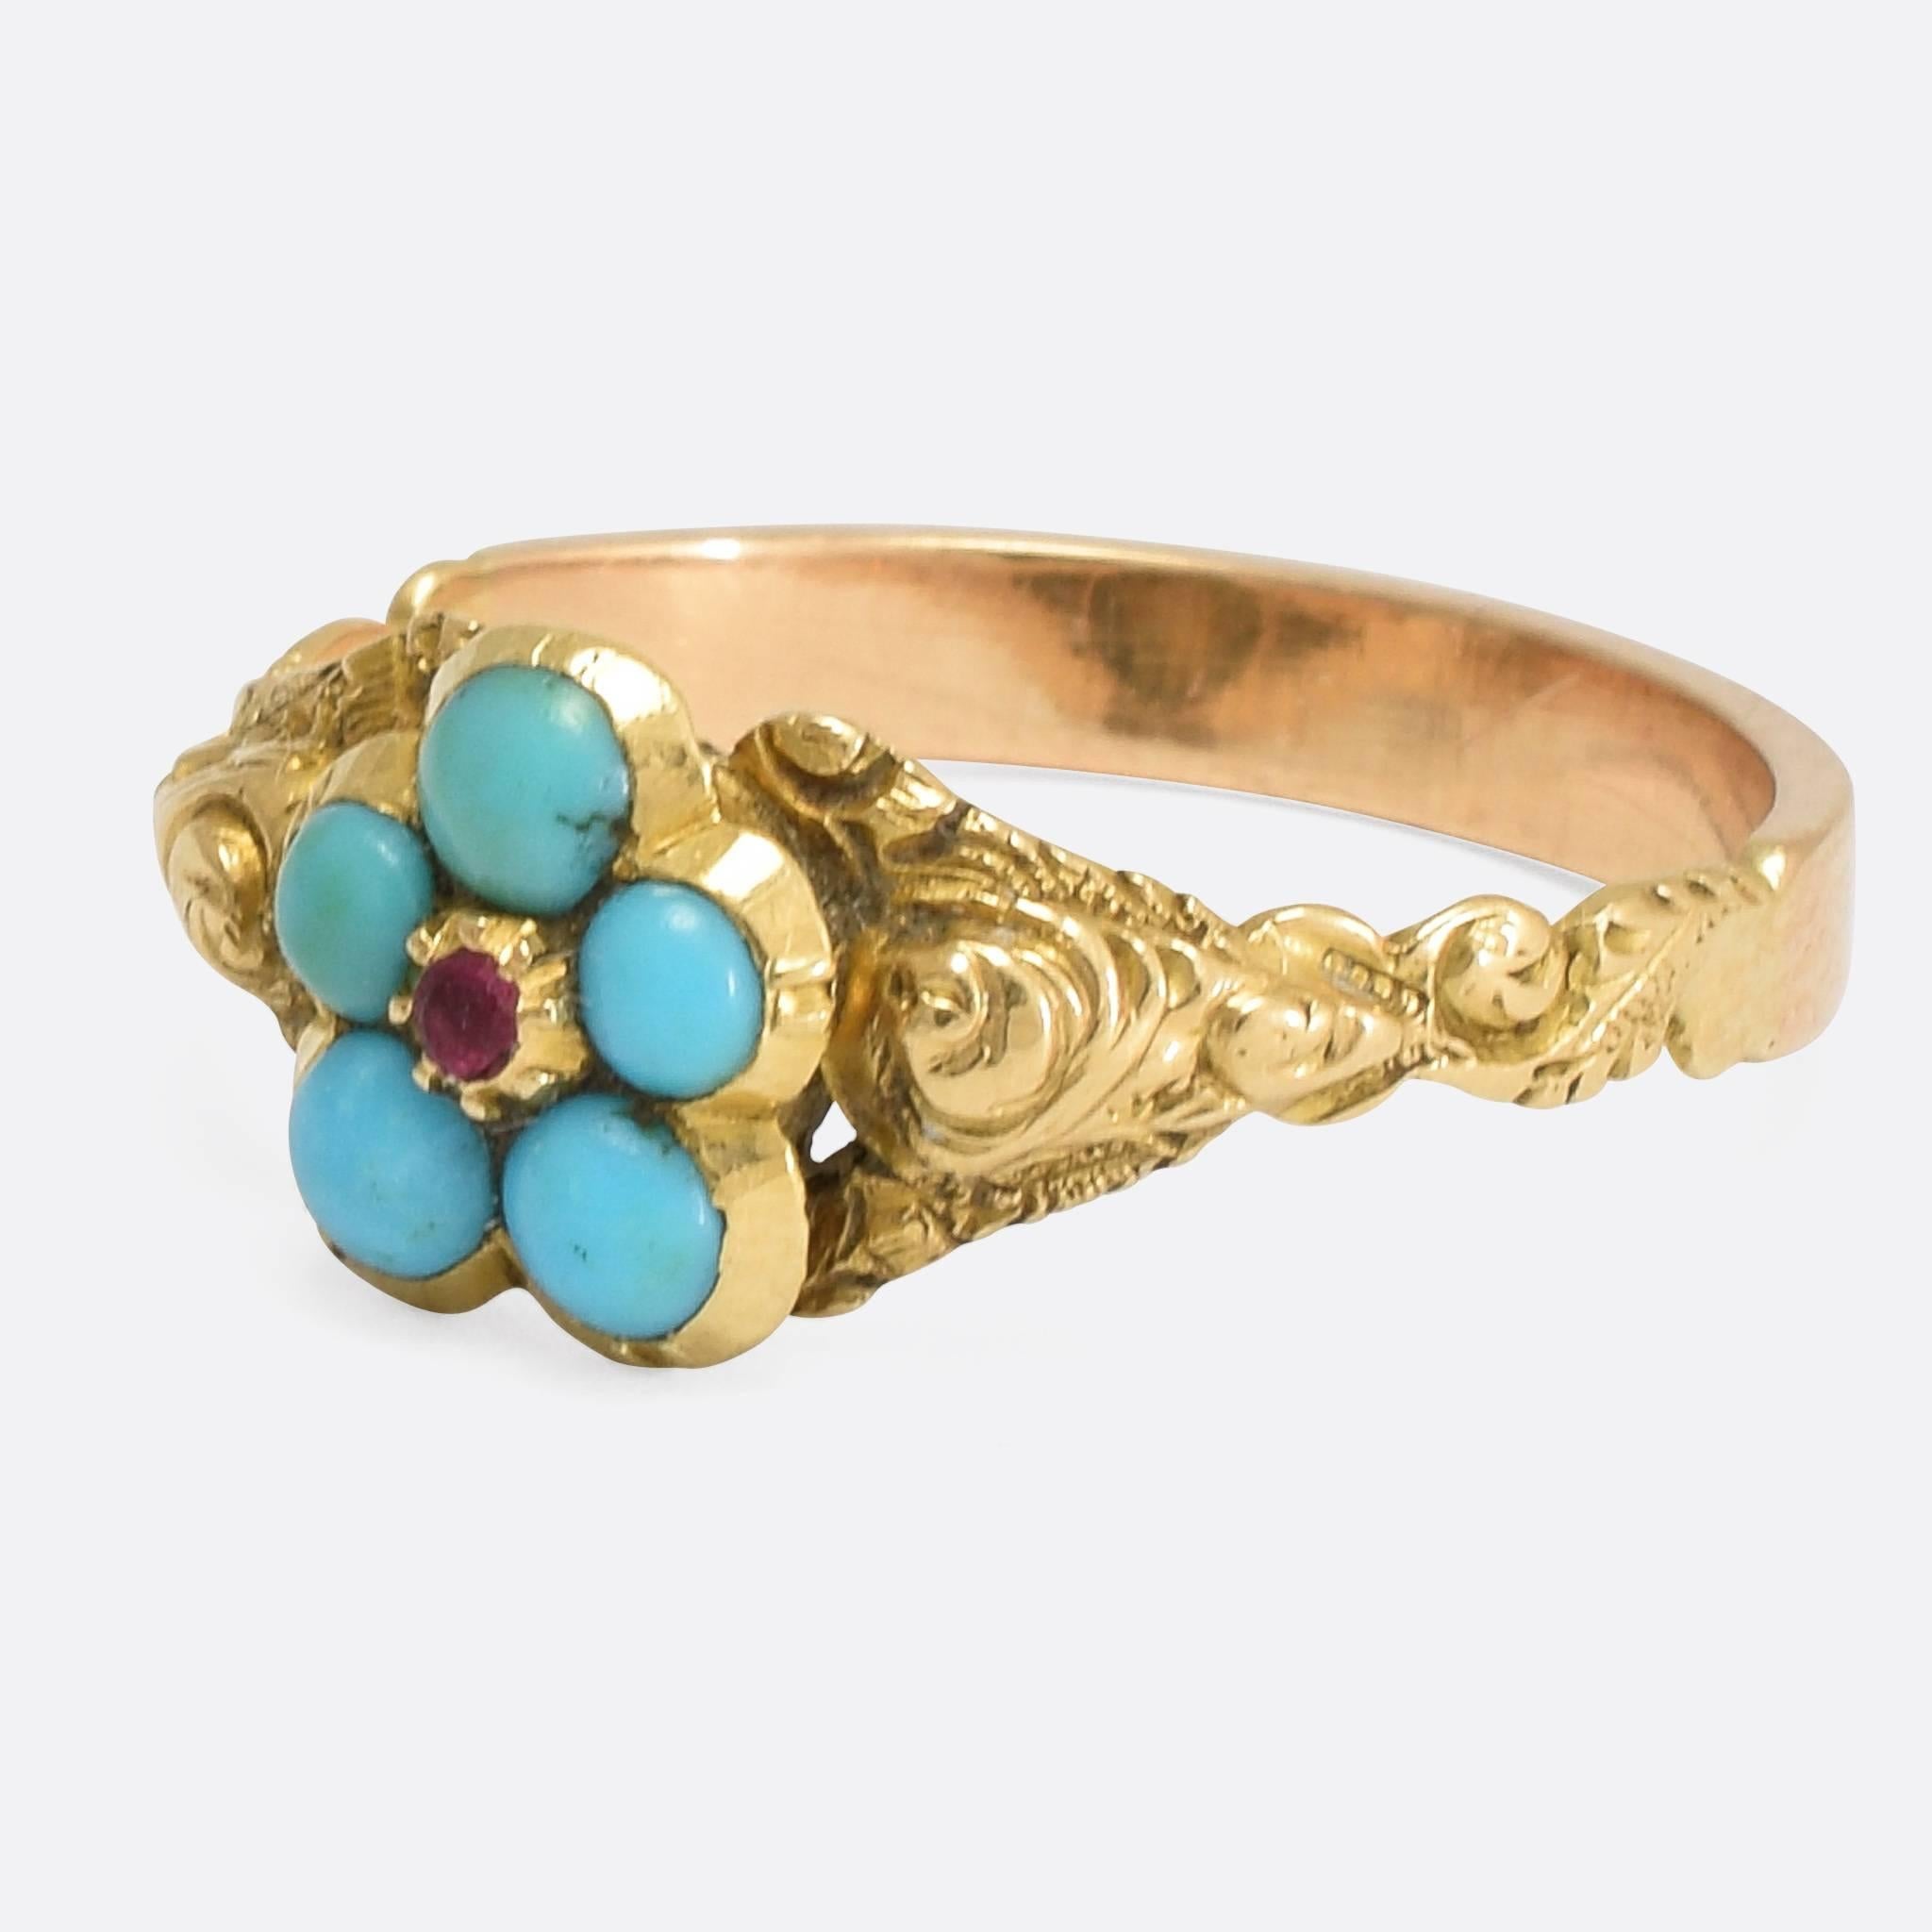 A gorgeous antique pansy ring with exquisite hand-chased shoulder detailing. The head is modelled as a pansy flower - set with five turquoise cabochons around a central ruby - while the band is modelled in 15k yellow gold. 
The name pansy is derived